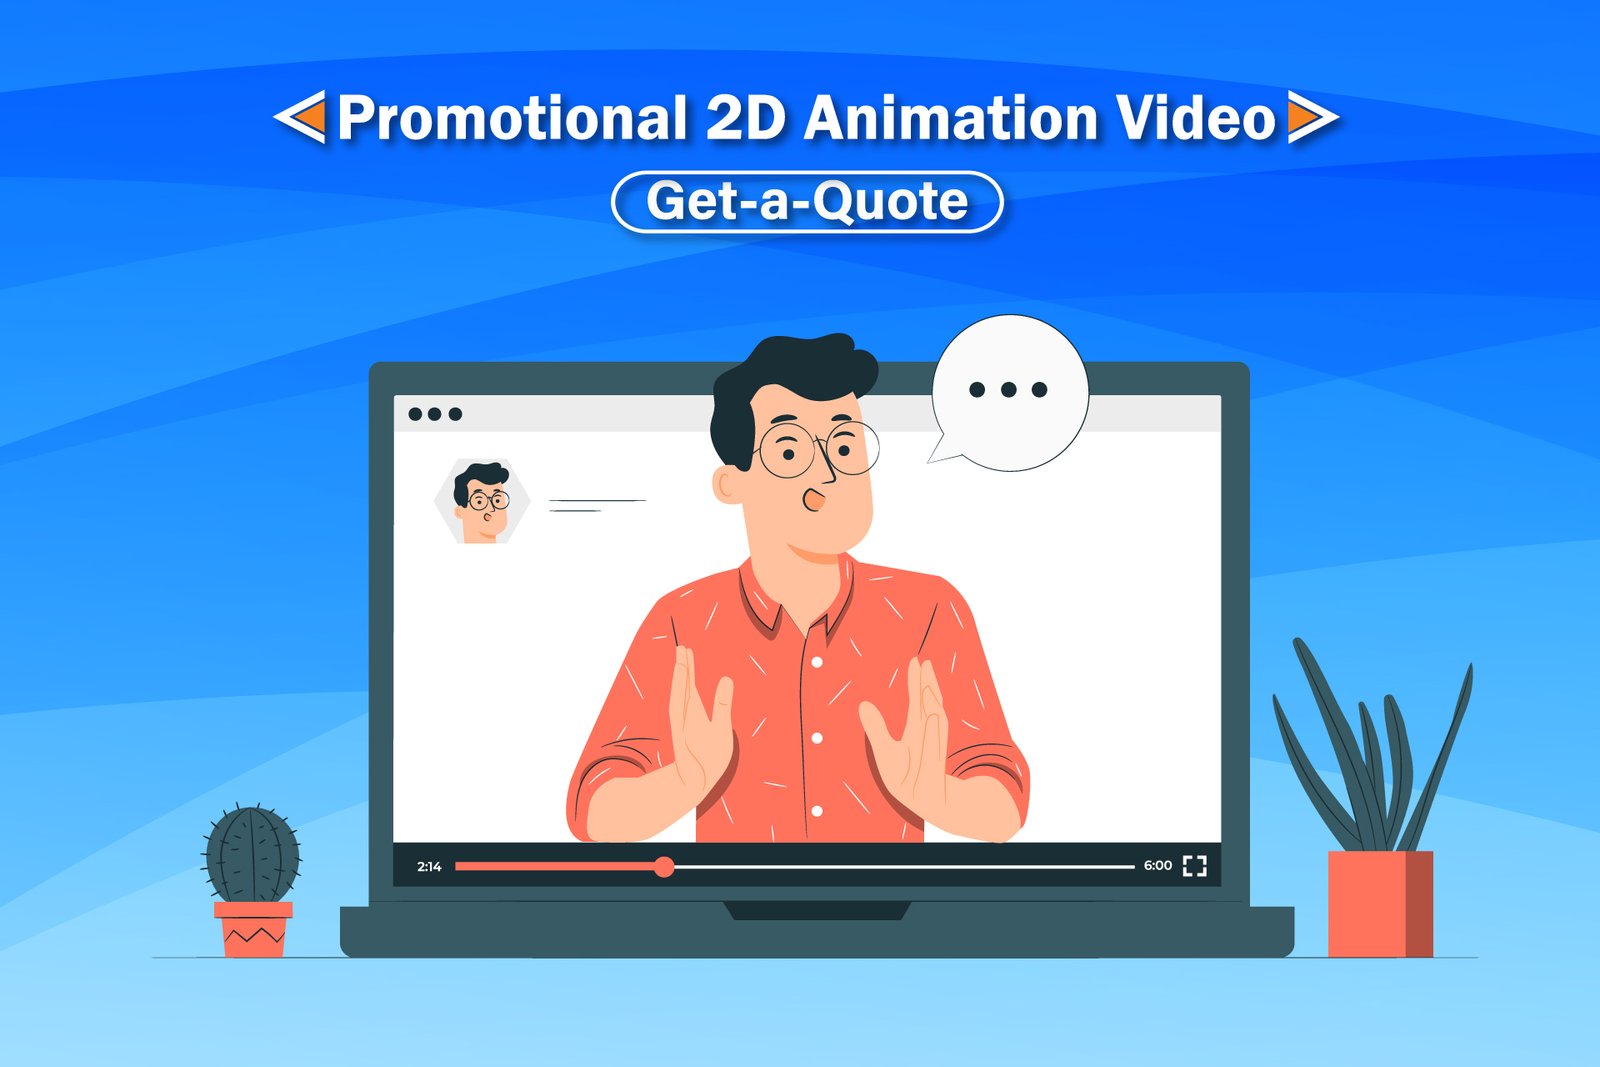 Promotional 2D animation video